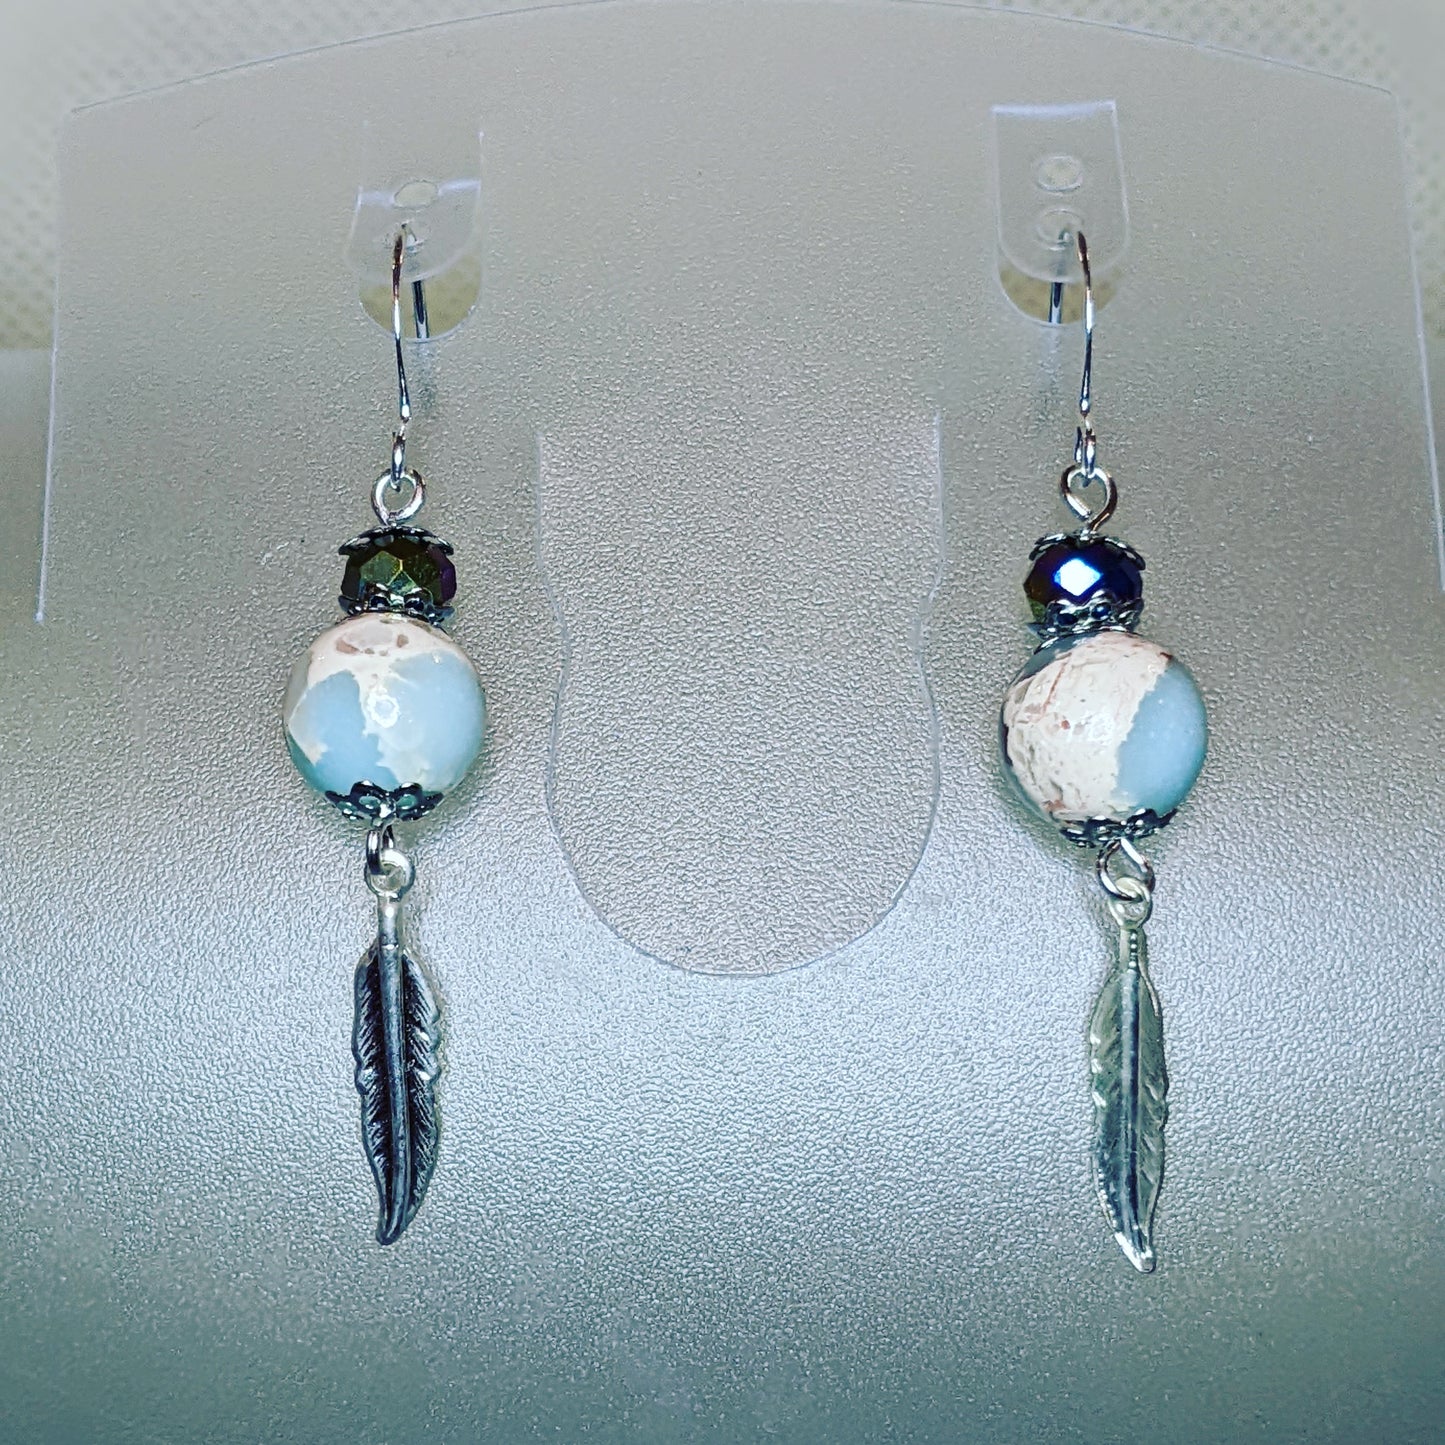 Feathered Beauty Beaded Earrings Dragon & Wolf Designs   